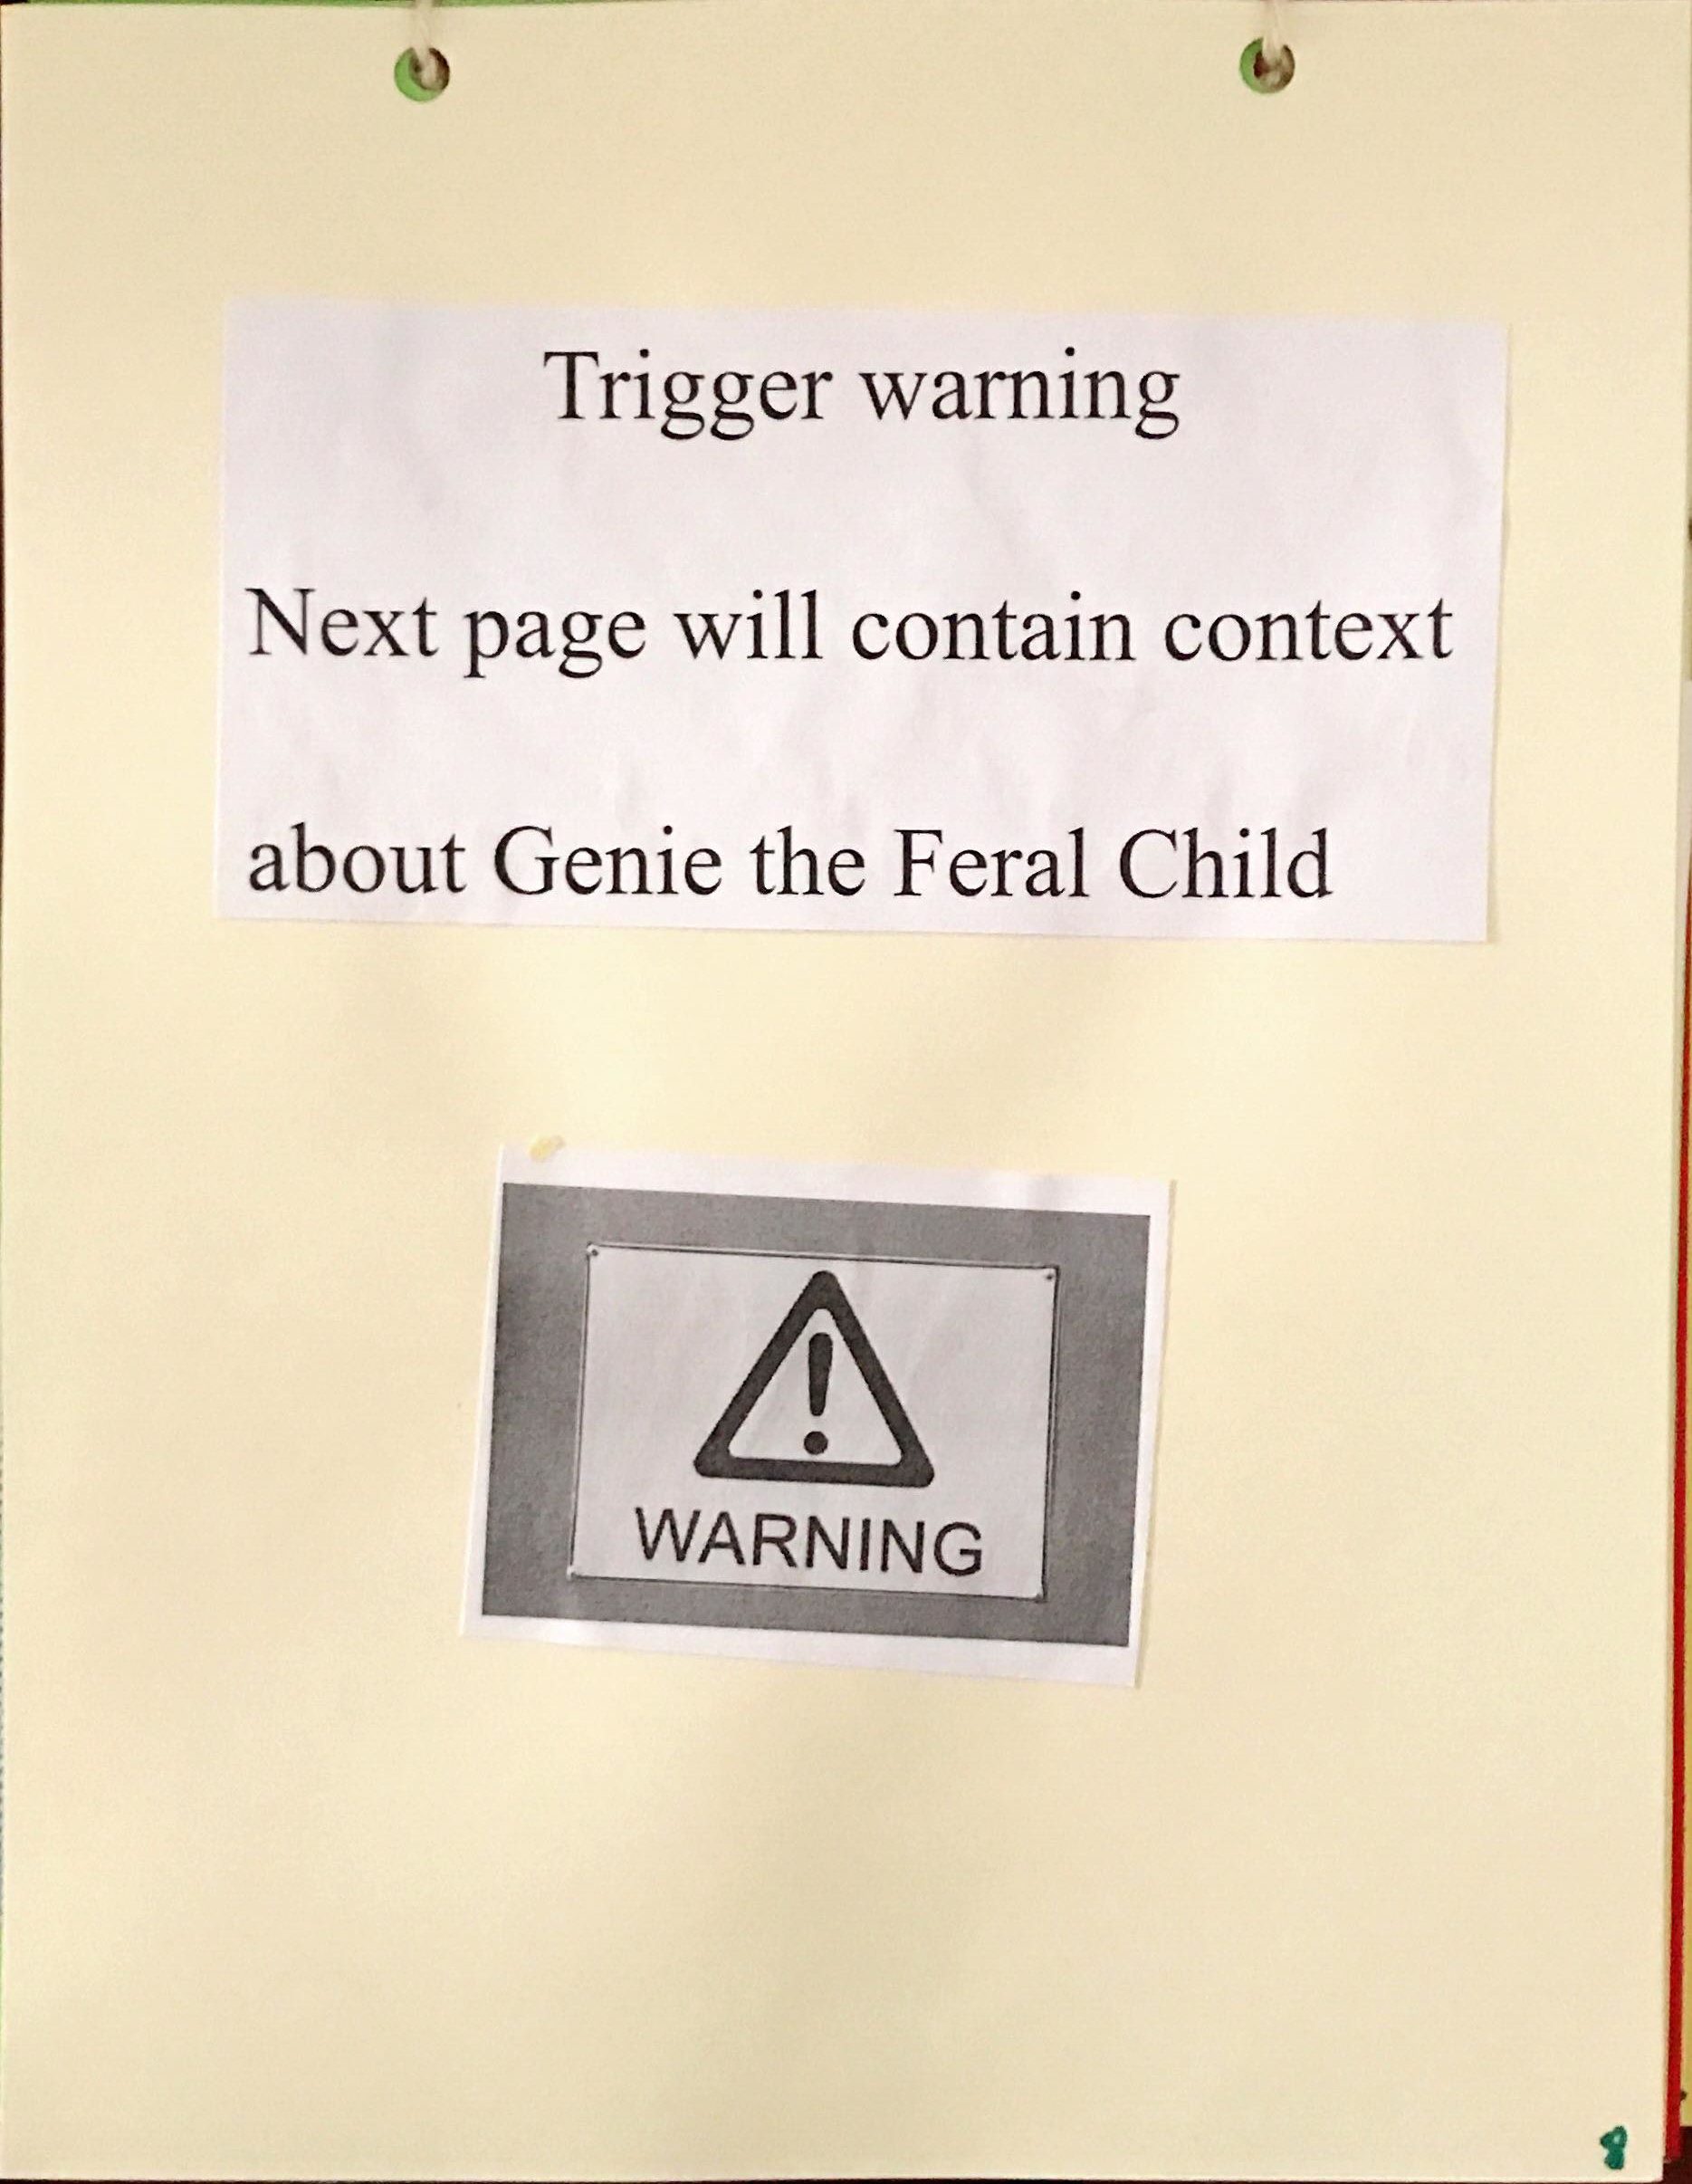 Page 10: Trigger warning for information on Genie the Feral Child